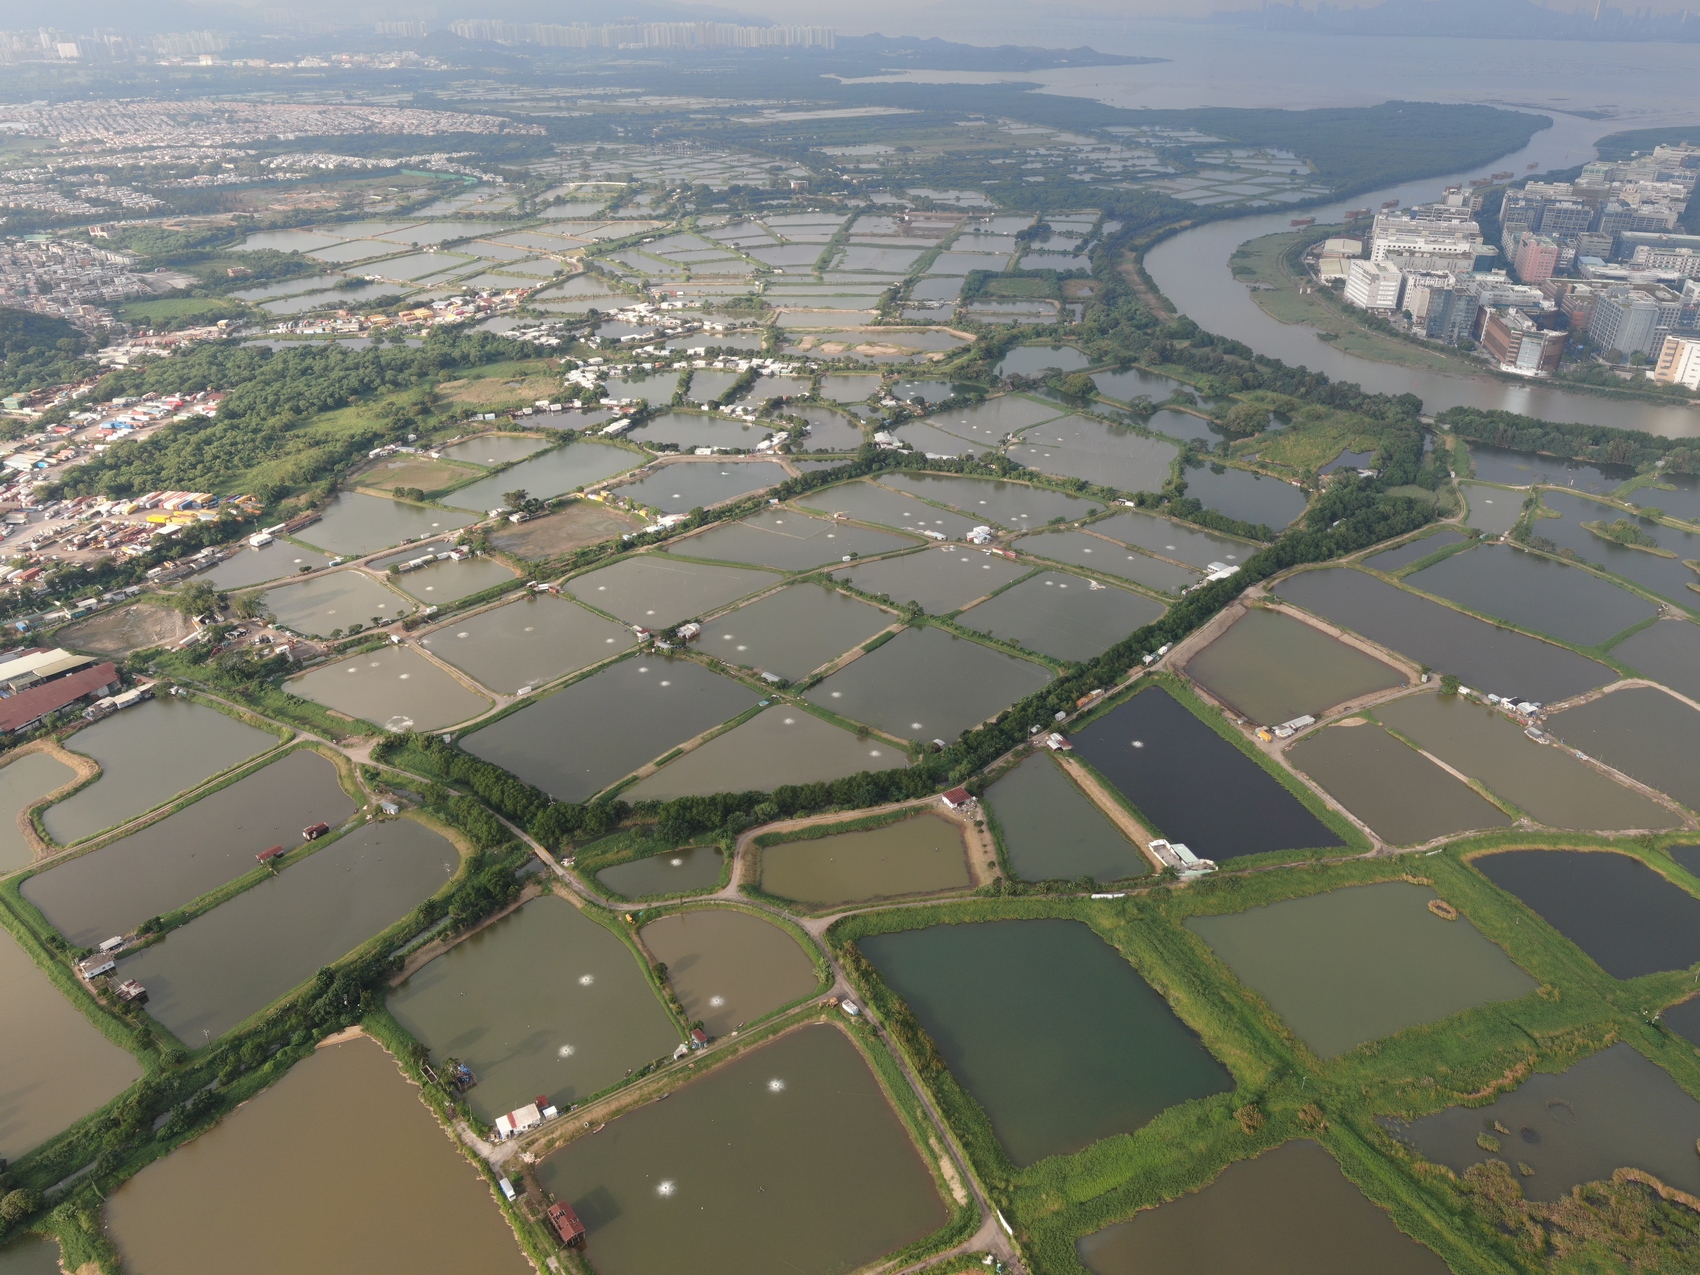 An aerial view of the fishponds and wetlands in San Tin, an area which will be redeveloped into the San Tin Technopole by the government. Photo: Hong Kong Bird Watching Society (HKBWS).